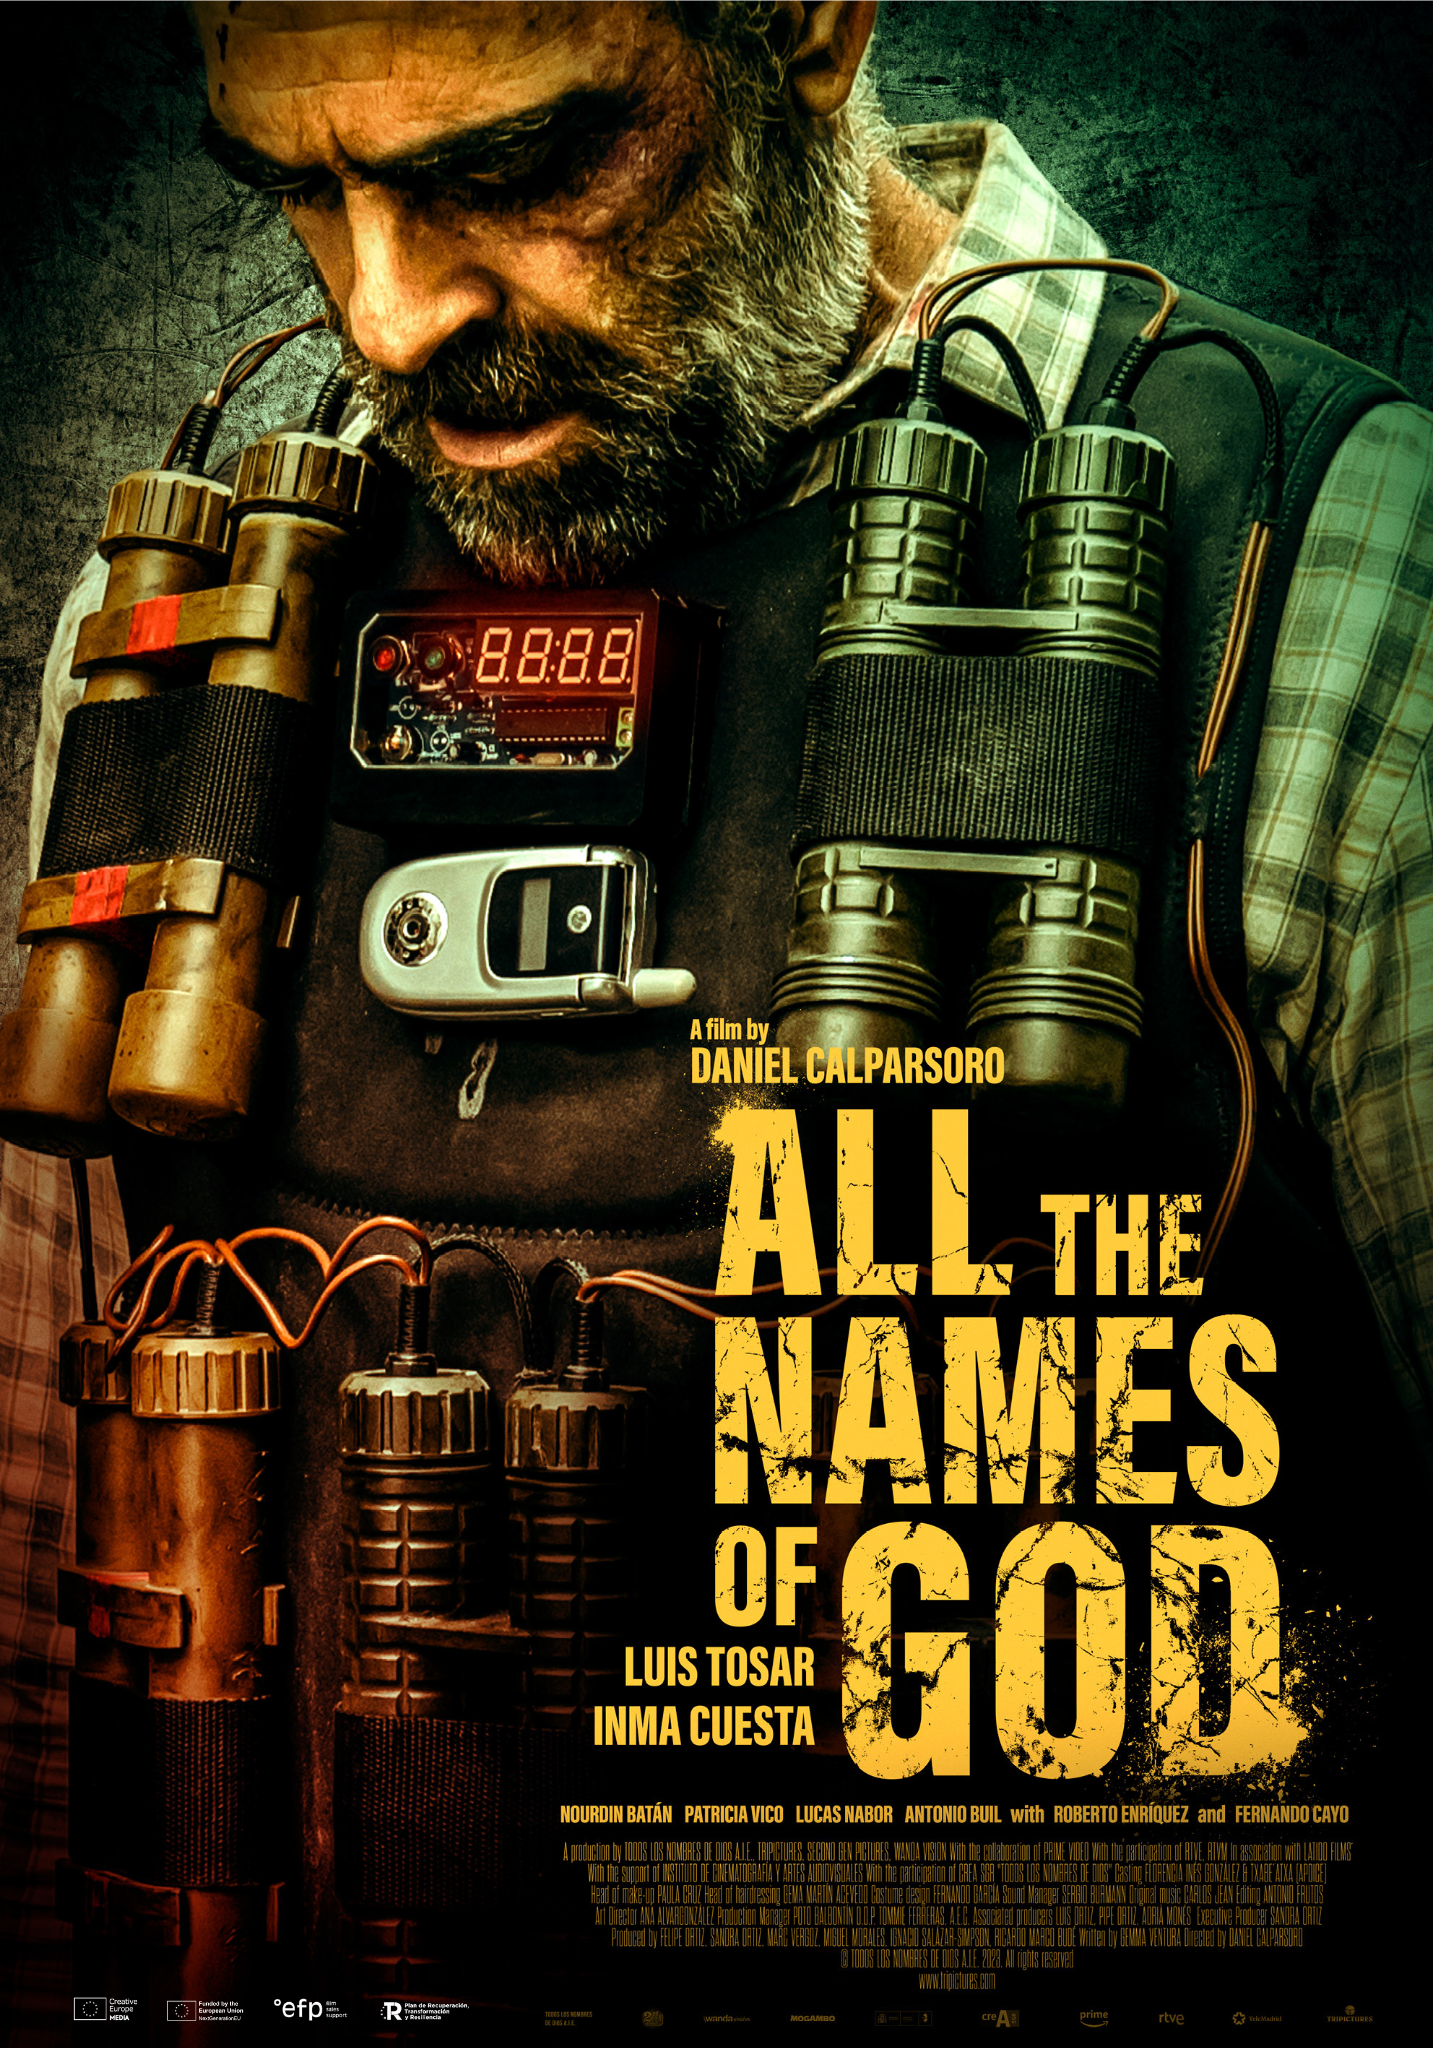 ALL THE NAMES OF GOD